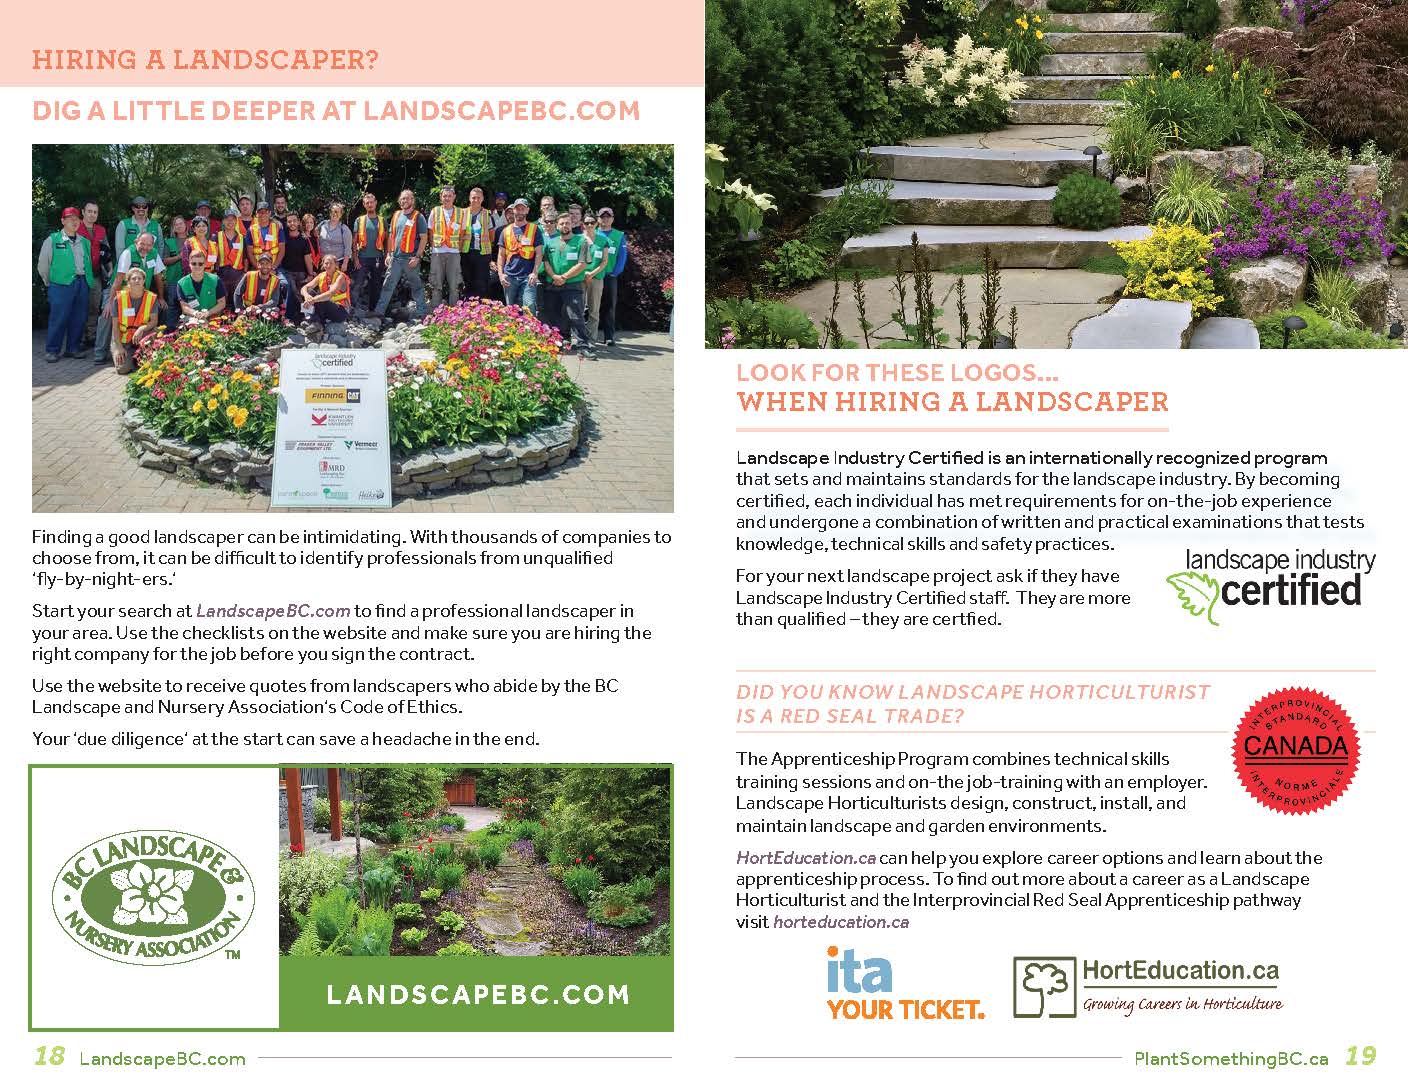 BCLNA_GardenWise_Booklet_FA_ReaderSpreads_Page_10.jpg